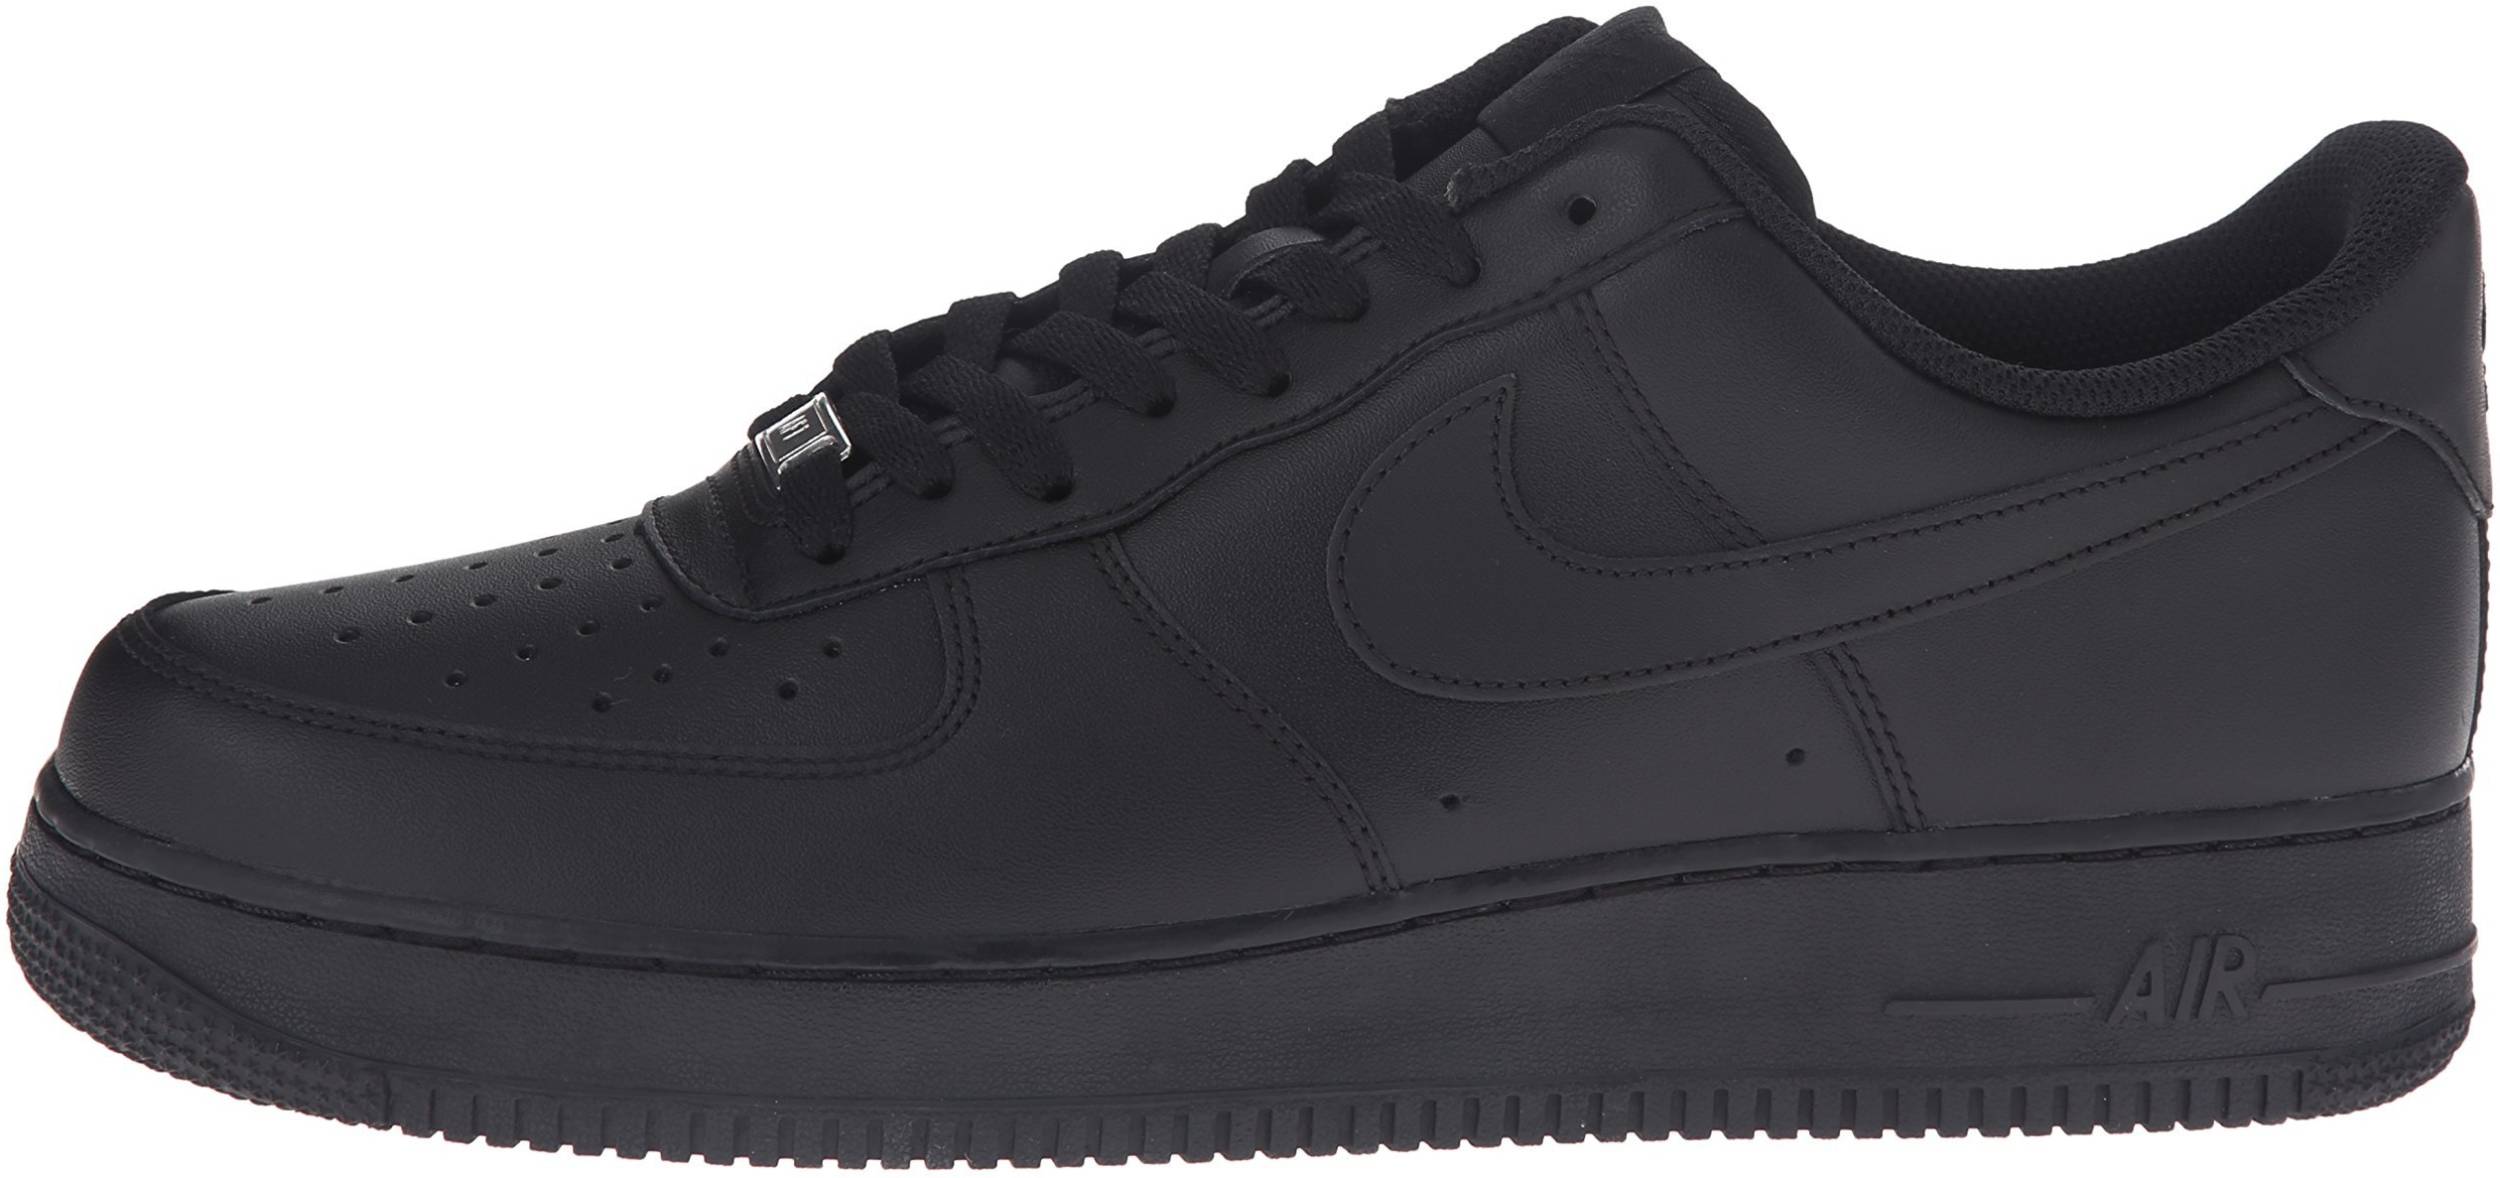 nike air force 1 low cost